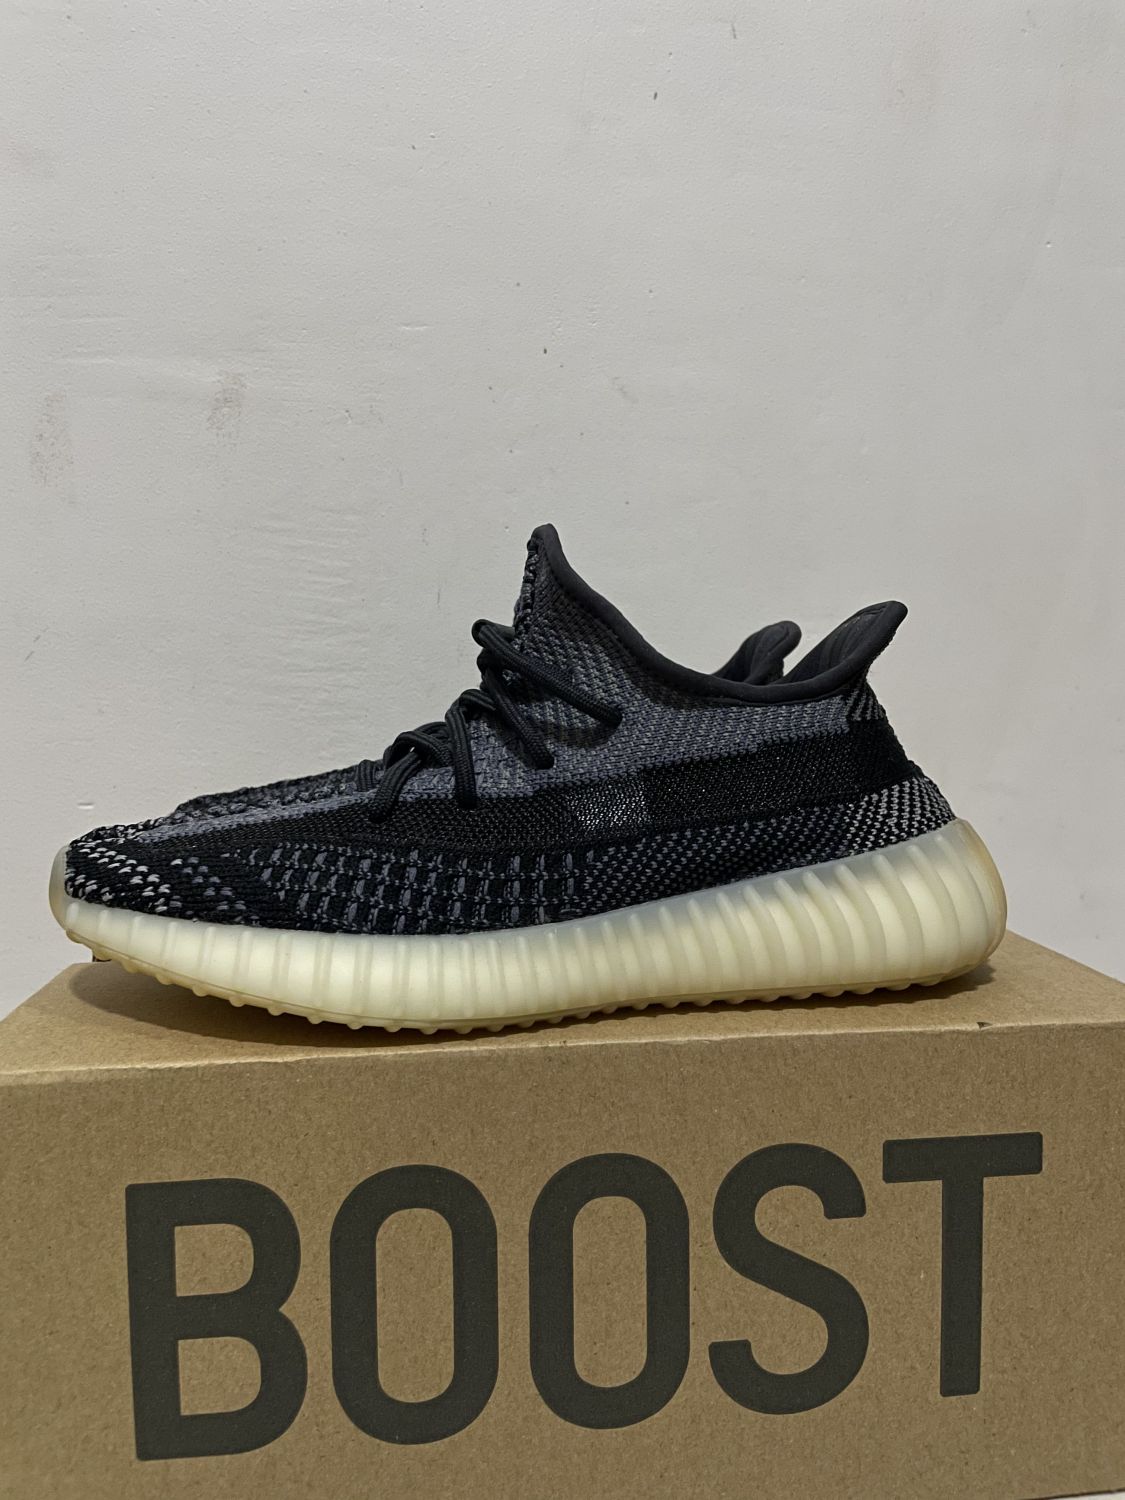 Adidas Yeezy Boost 350 V2 Carbon | AfterMarket